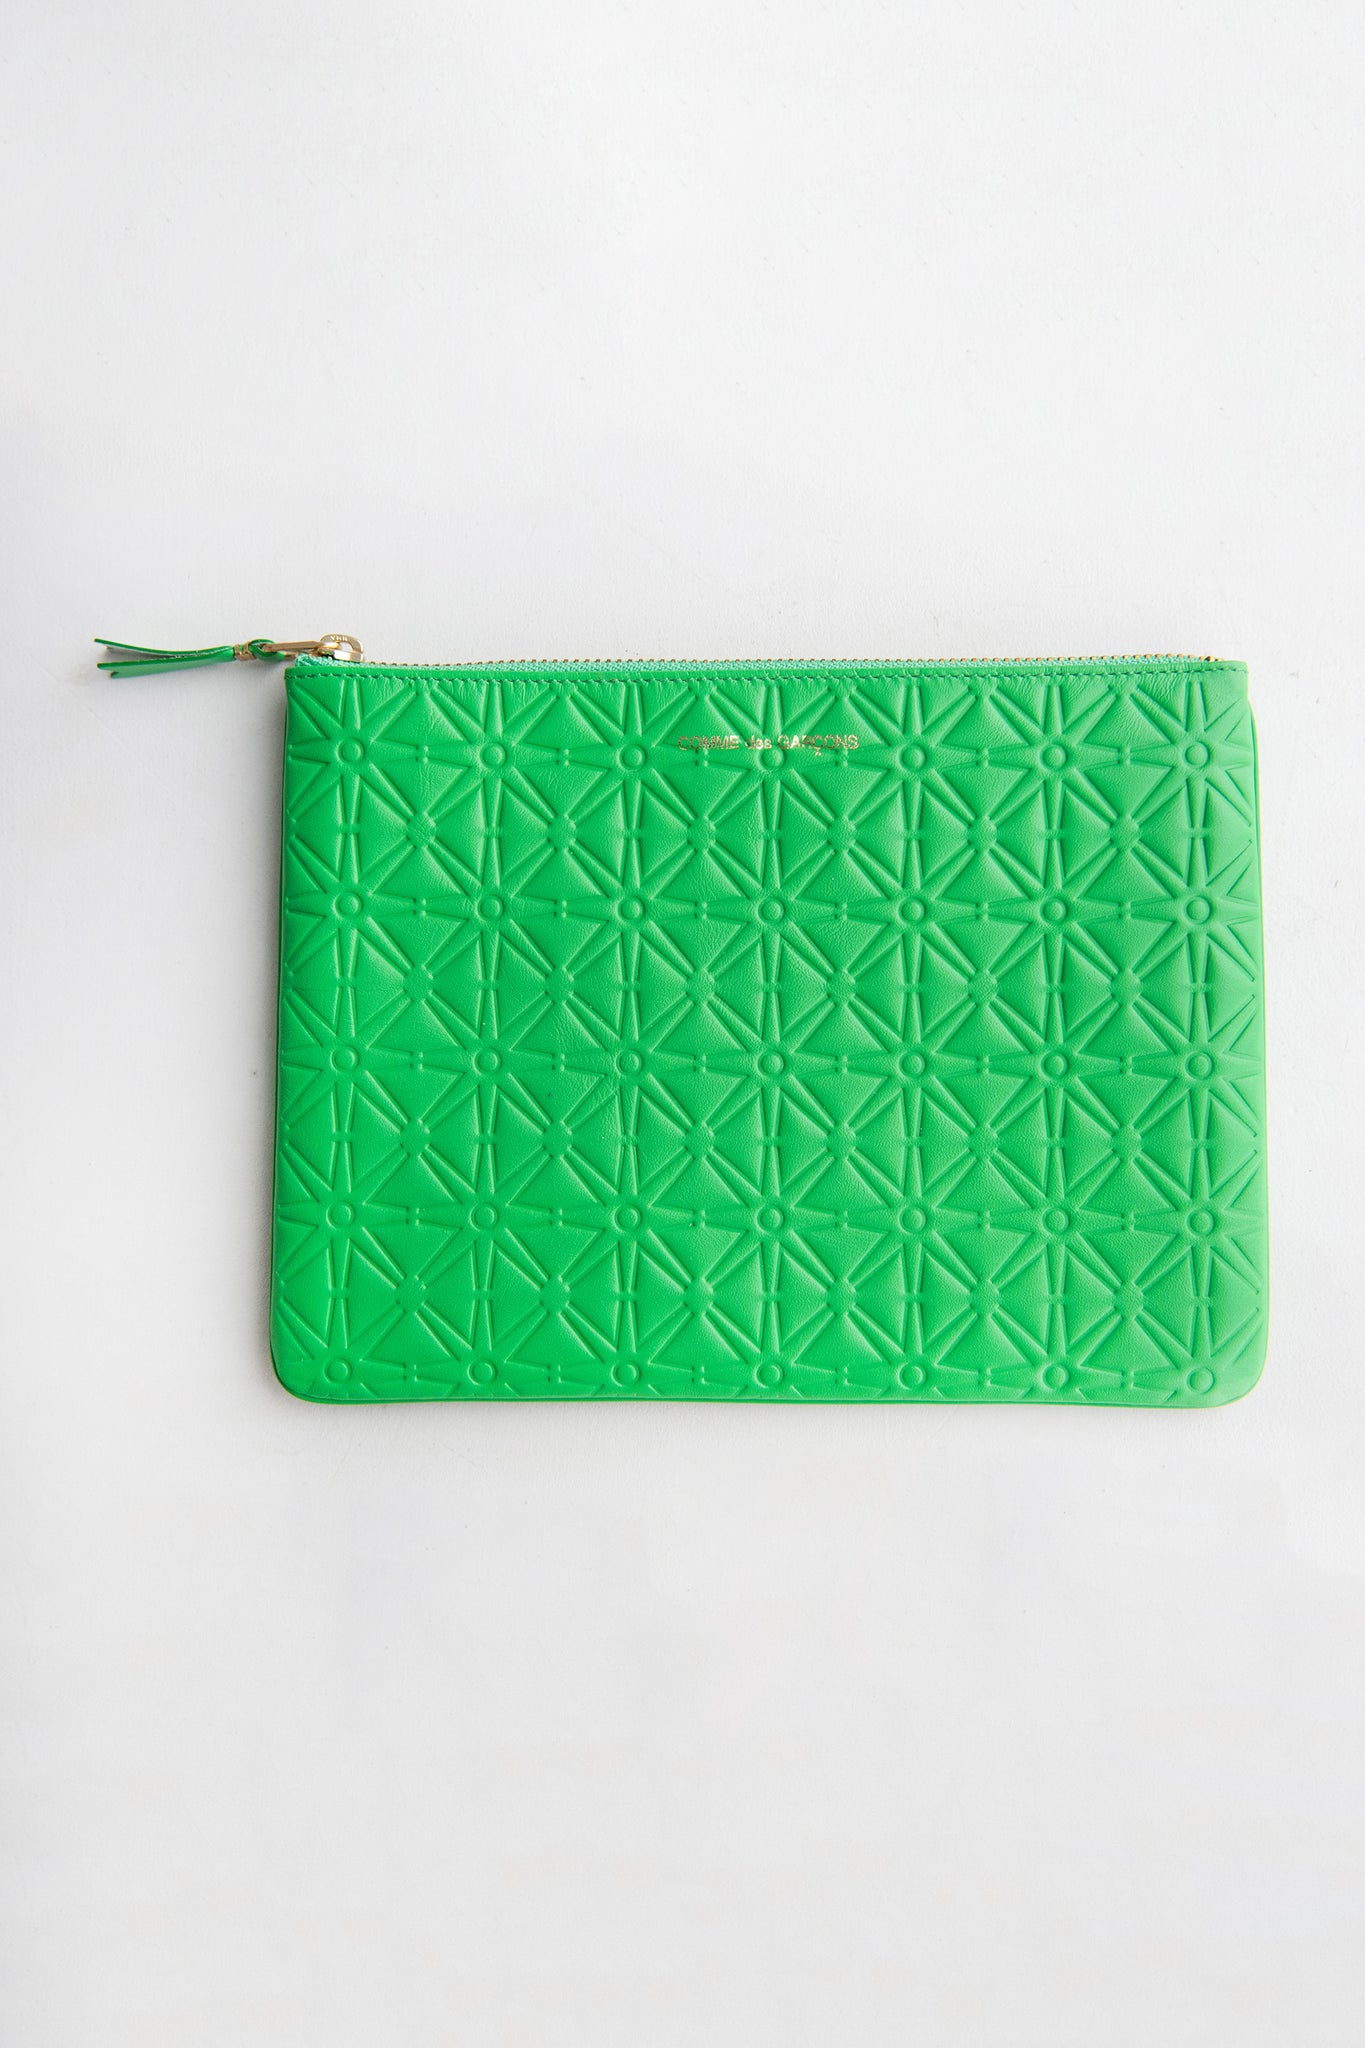 Comme des Garçons - Embossed Leather Zip Pouch, Green